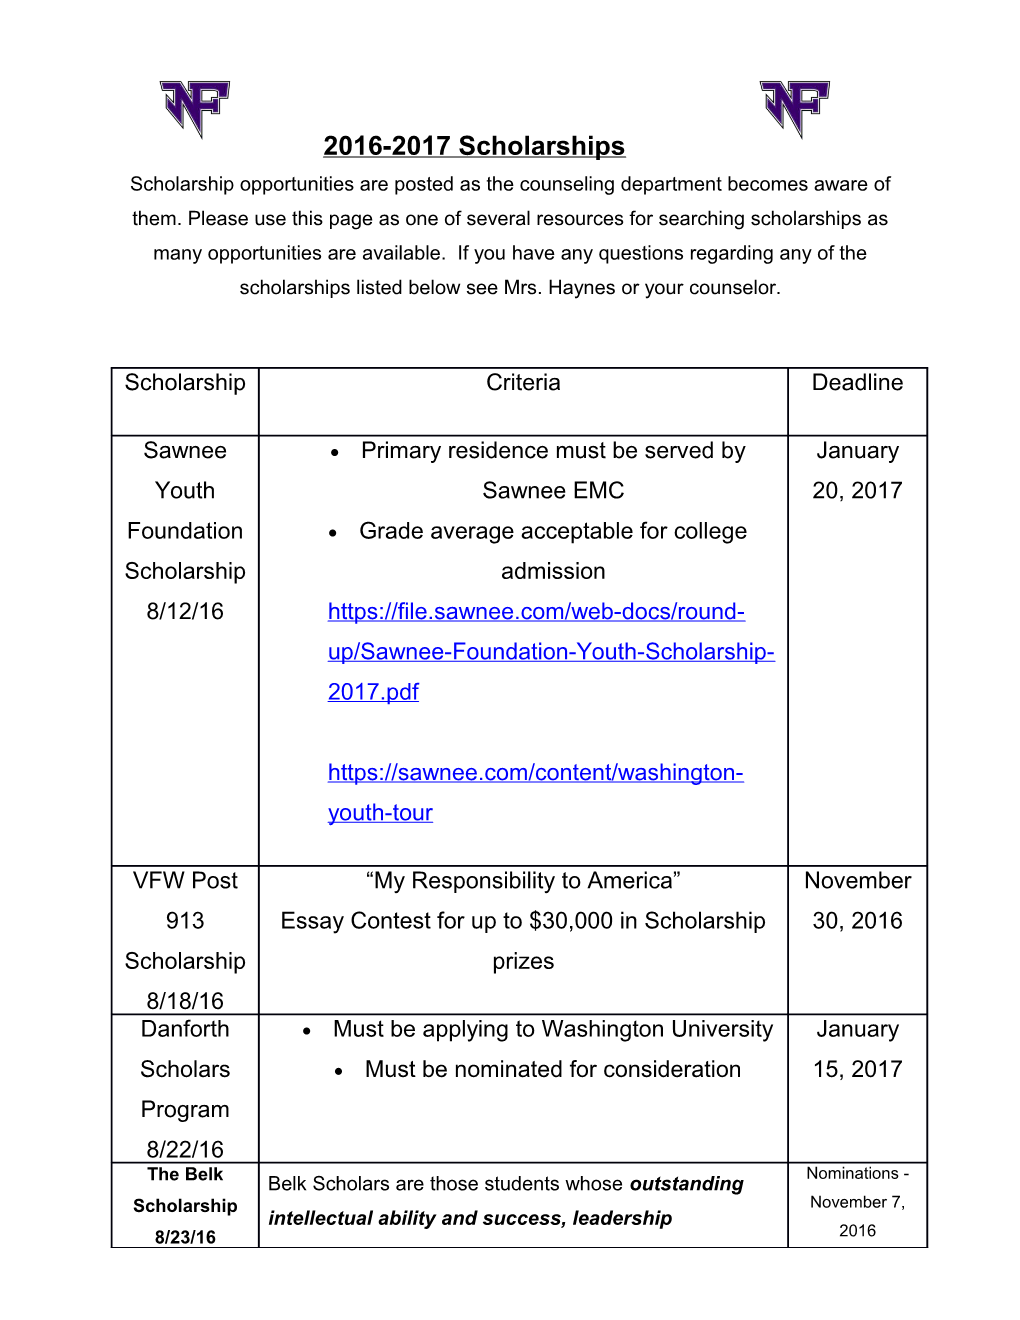 2016-2017 Scholarships Scholarship Opportunities Are Posted As the Counseling Department